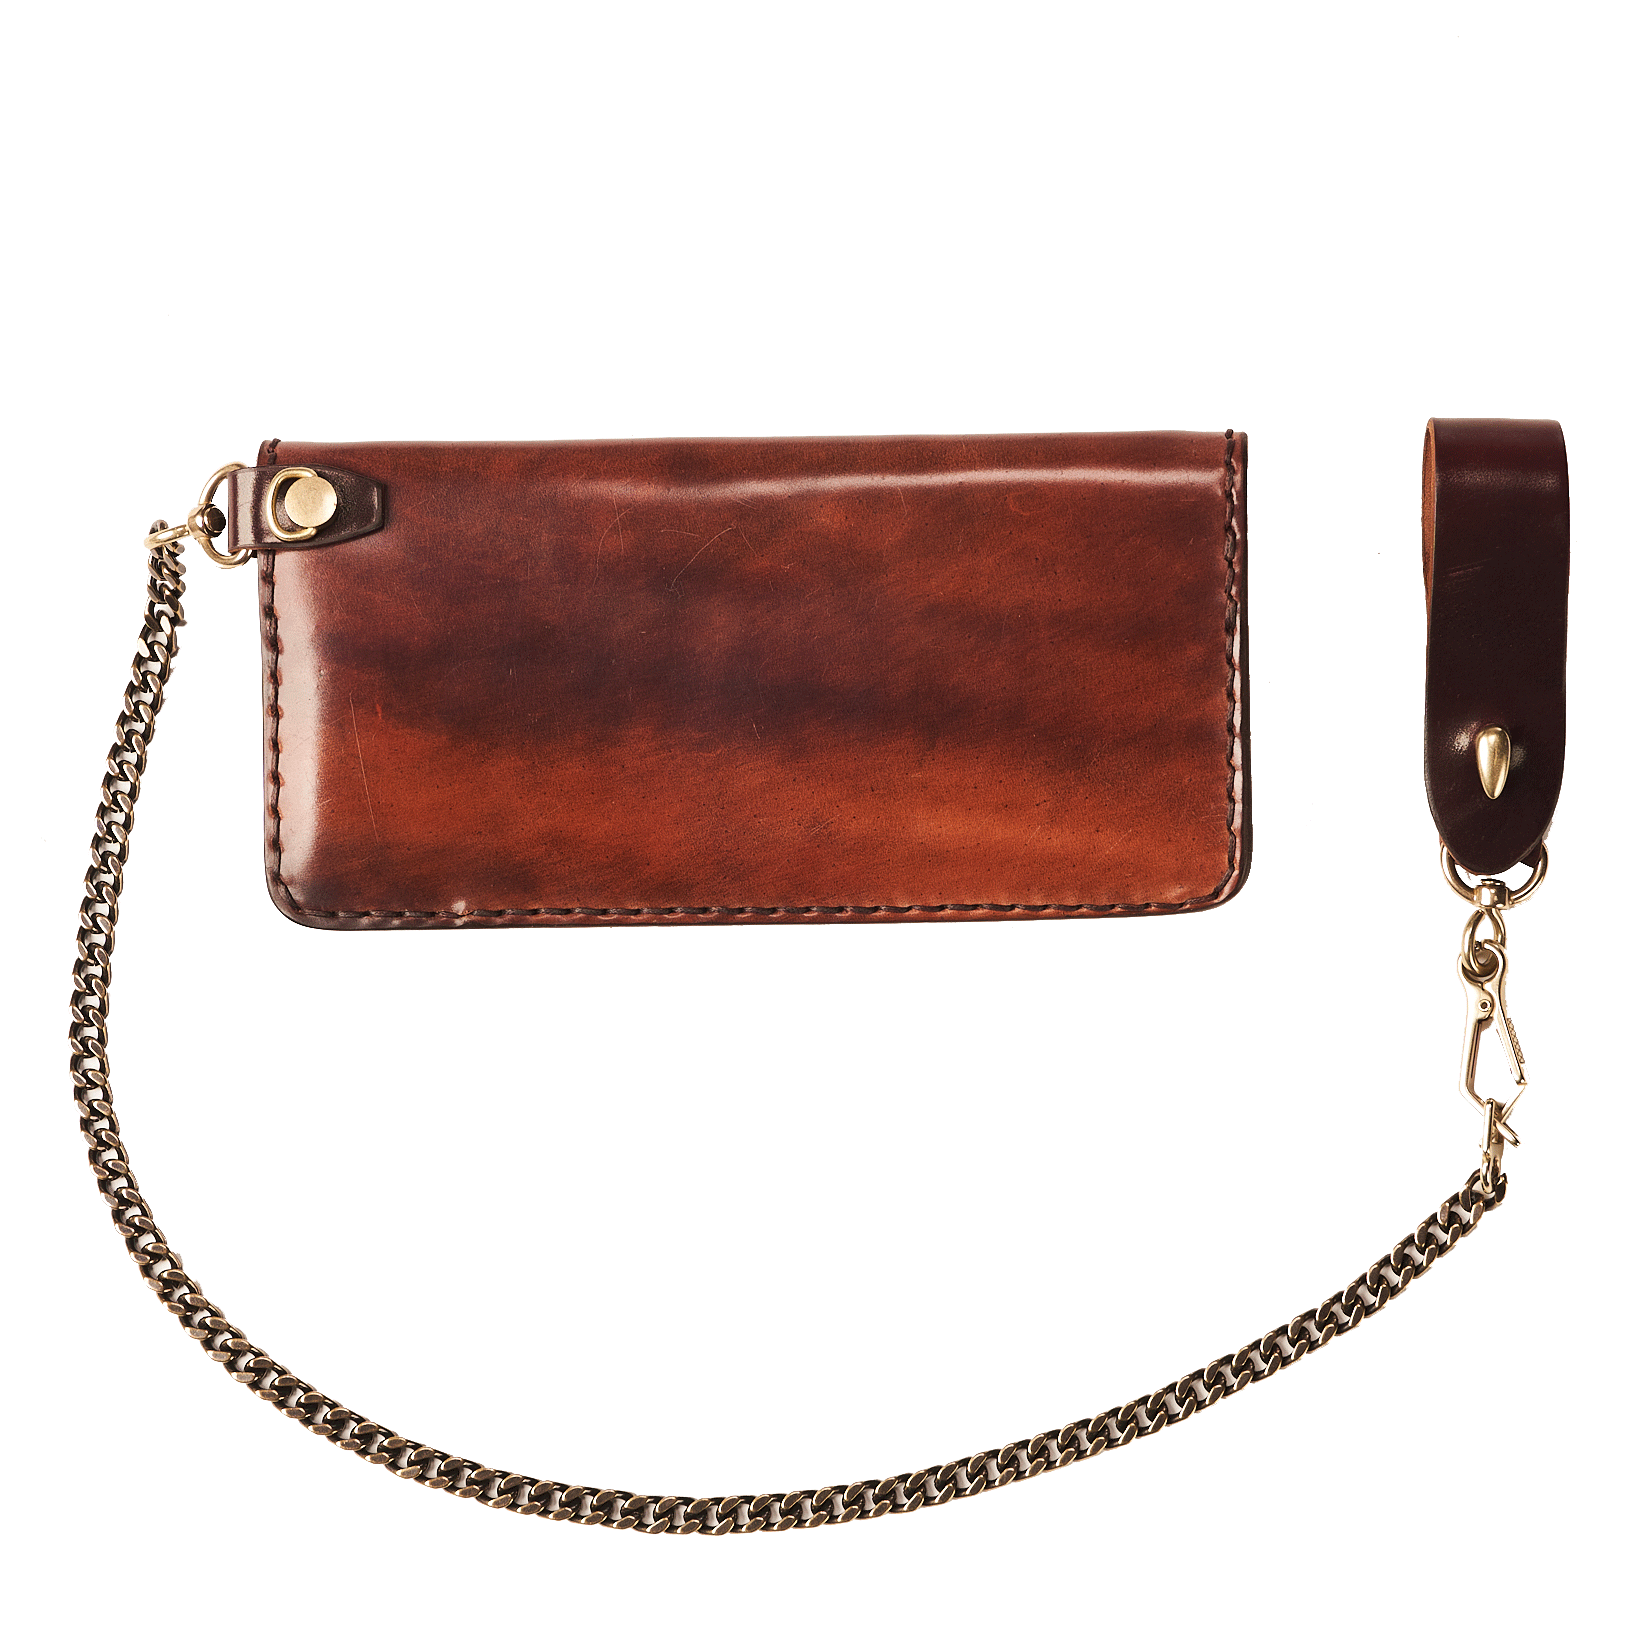 Horween® Marbled Shell Chain Wallet No.9